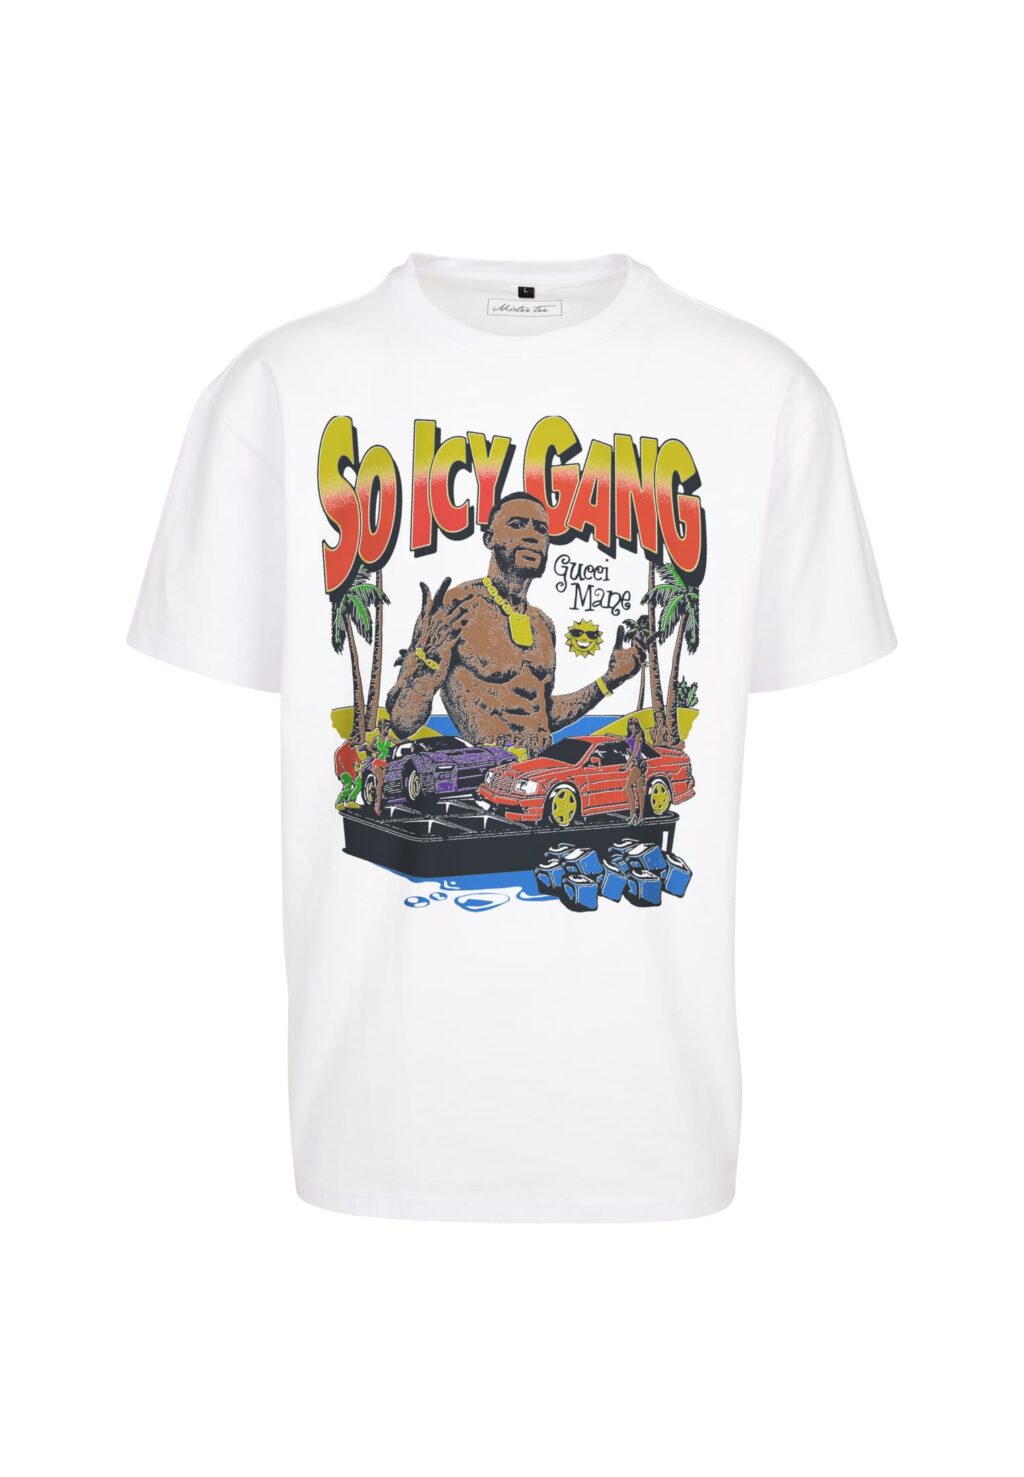 Gucci Mane So Icy Oversize Tee white MT3022